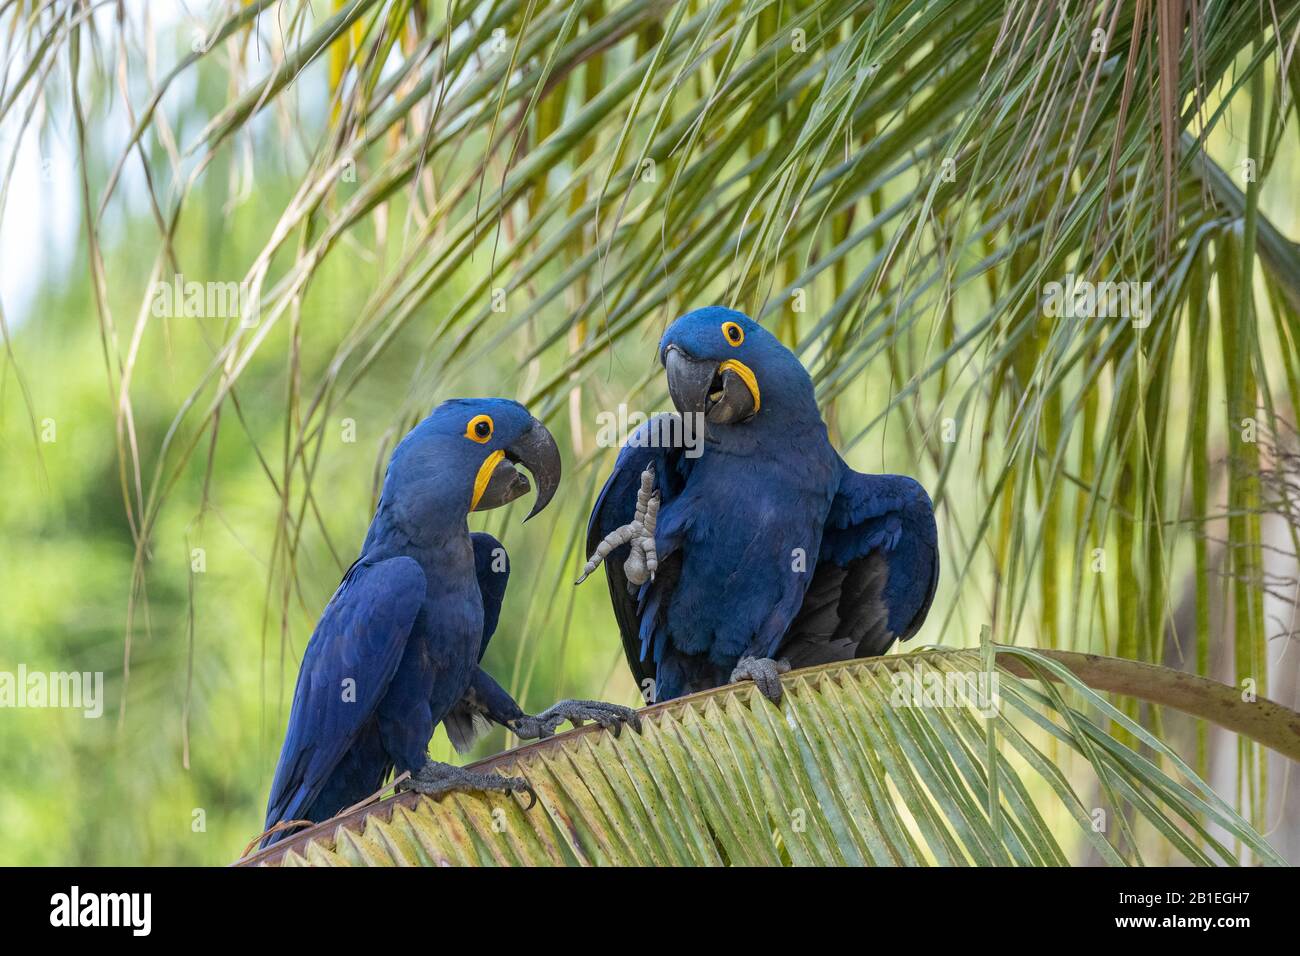 Hyacinth Macaw (Anodorhynchus hyacinthinus) adult, perched on a palm tree, Pantanal area, Mato Grosso, Brazil Stock Photo